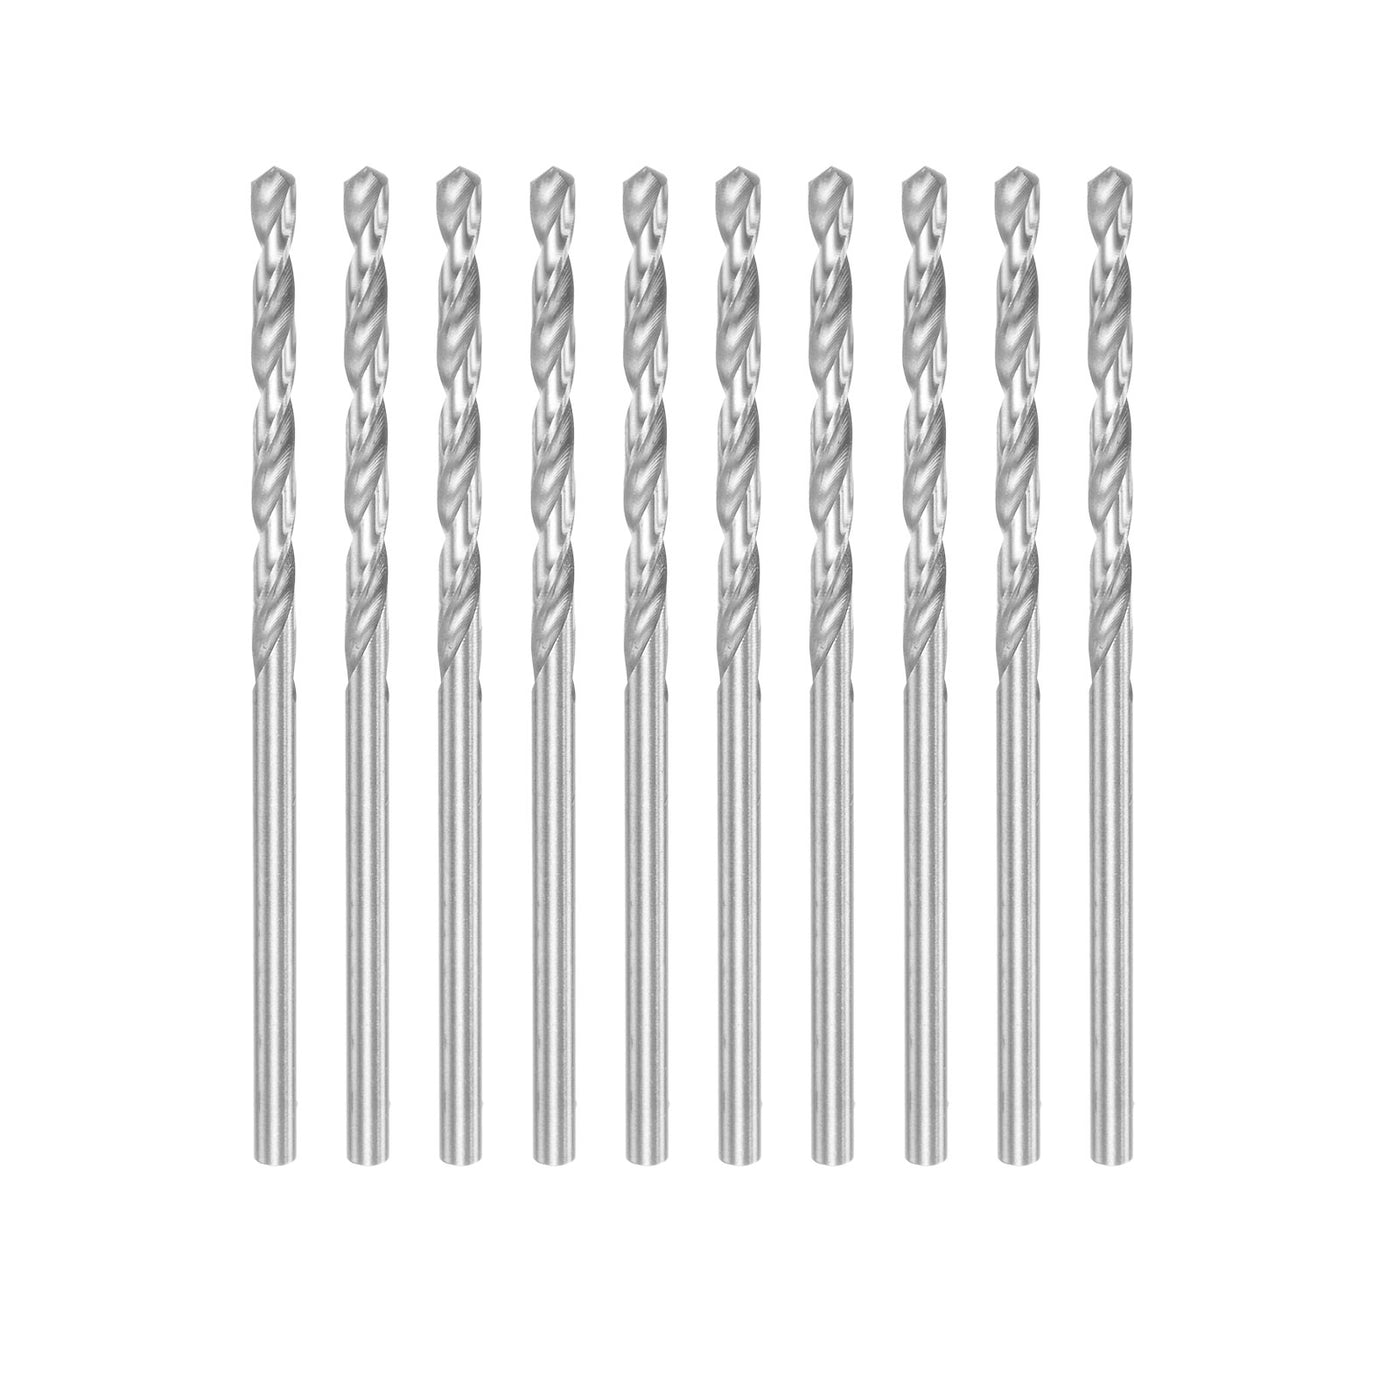 uxcell Uxcell 10 Pcs 2.45mm High Speed Steel Drill Bits, Fully Ground 56mm Length Drill Bit